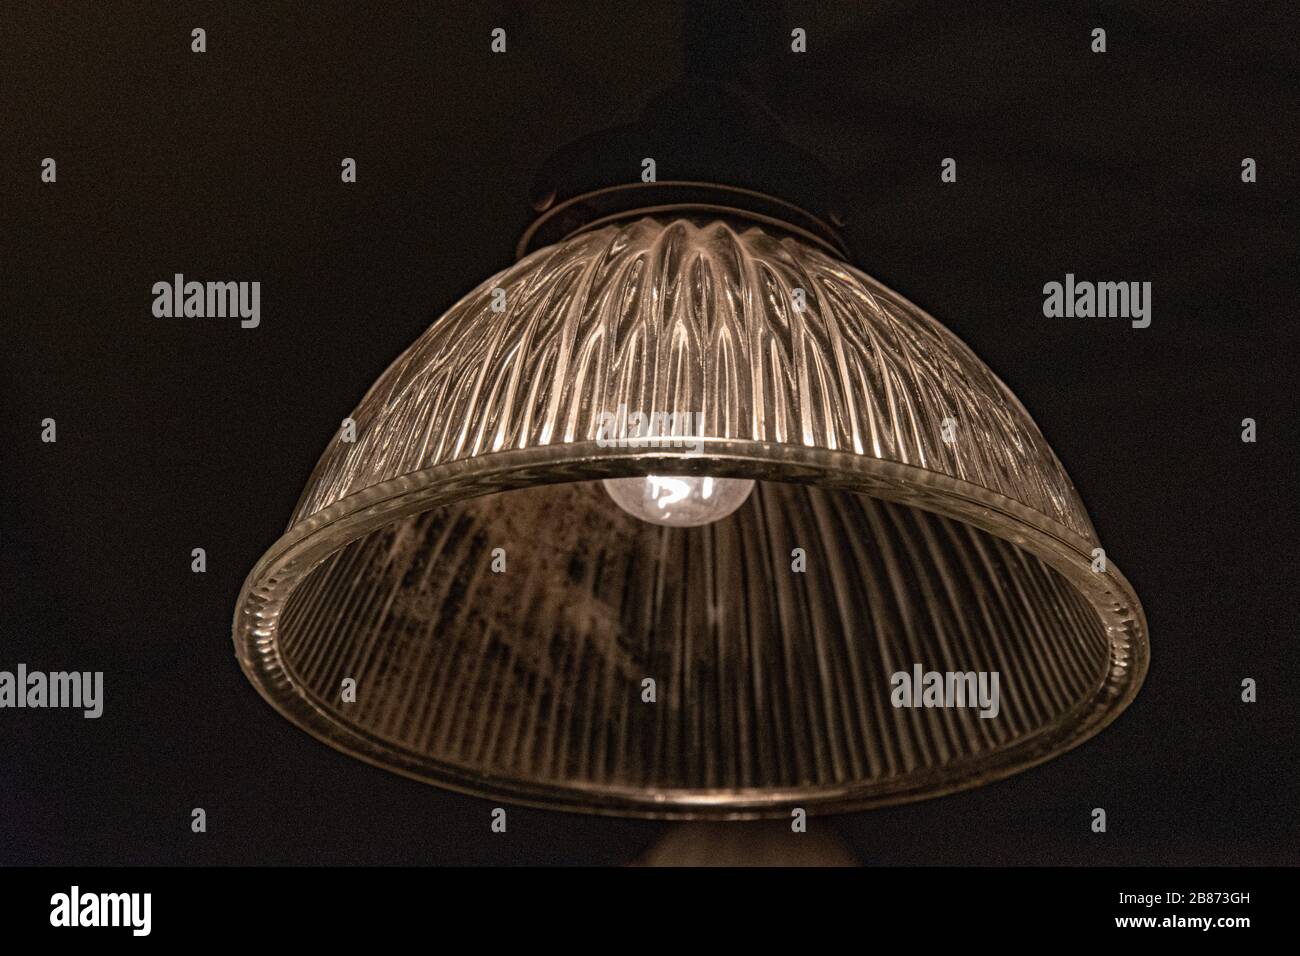 Vintage ornate glass lampshade closeup on black background. Ribbed surface of transparent glass lamp with light bulb inside. Antique pendant light Stock Photo